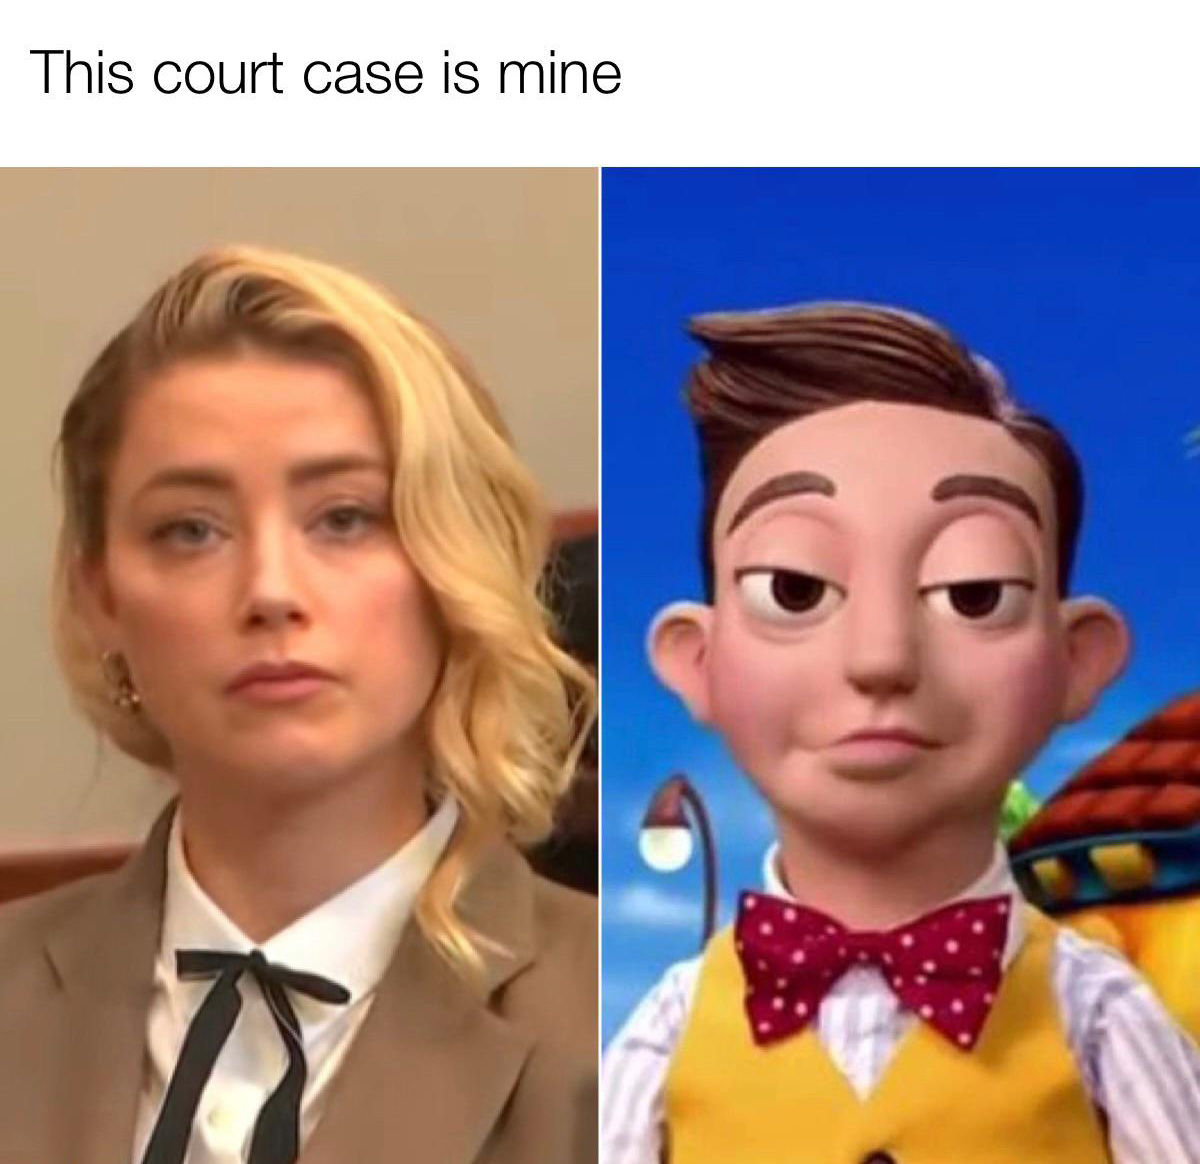 dank memes - funny memes - kid from lazy town - This court case is mine